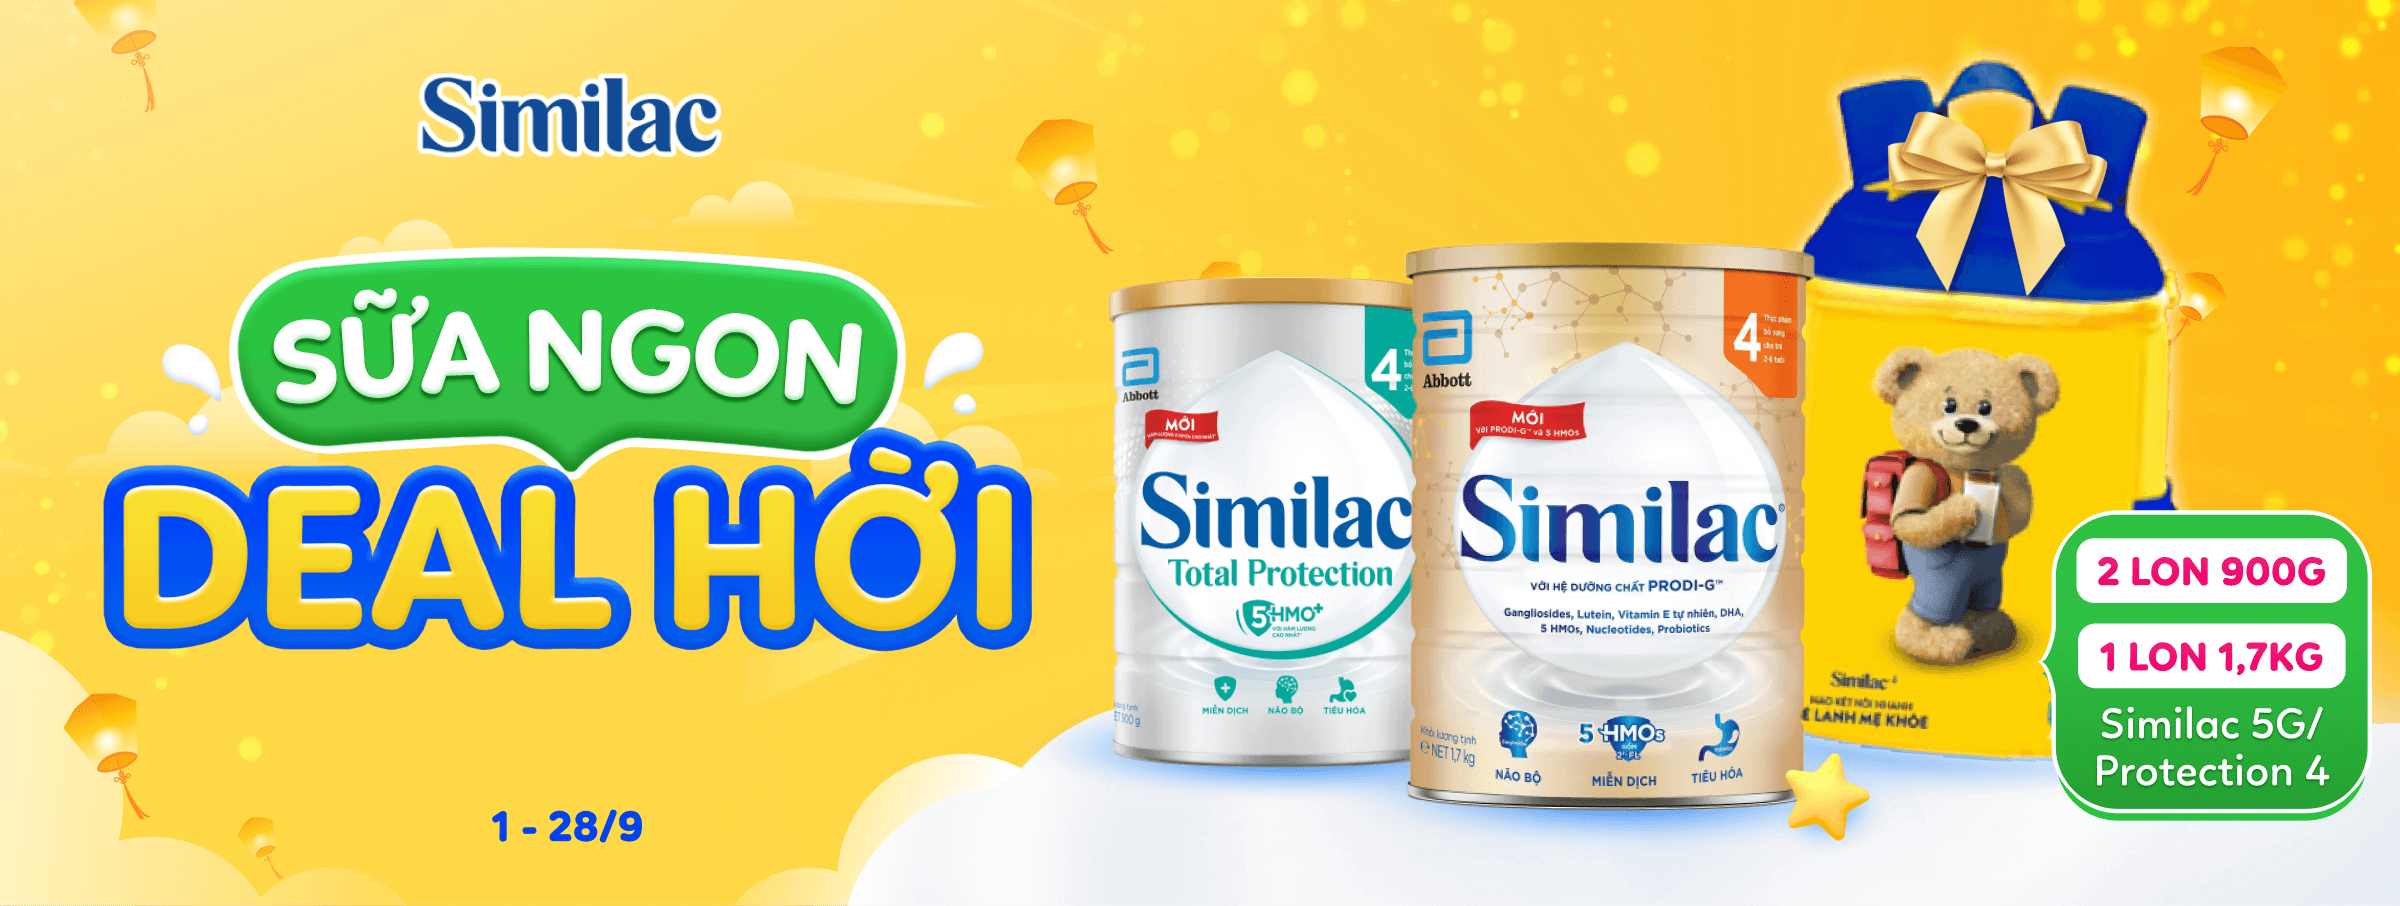 Similac T9 -  CATE